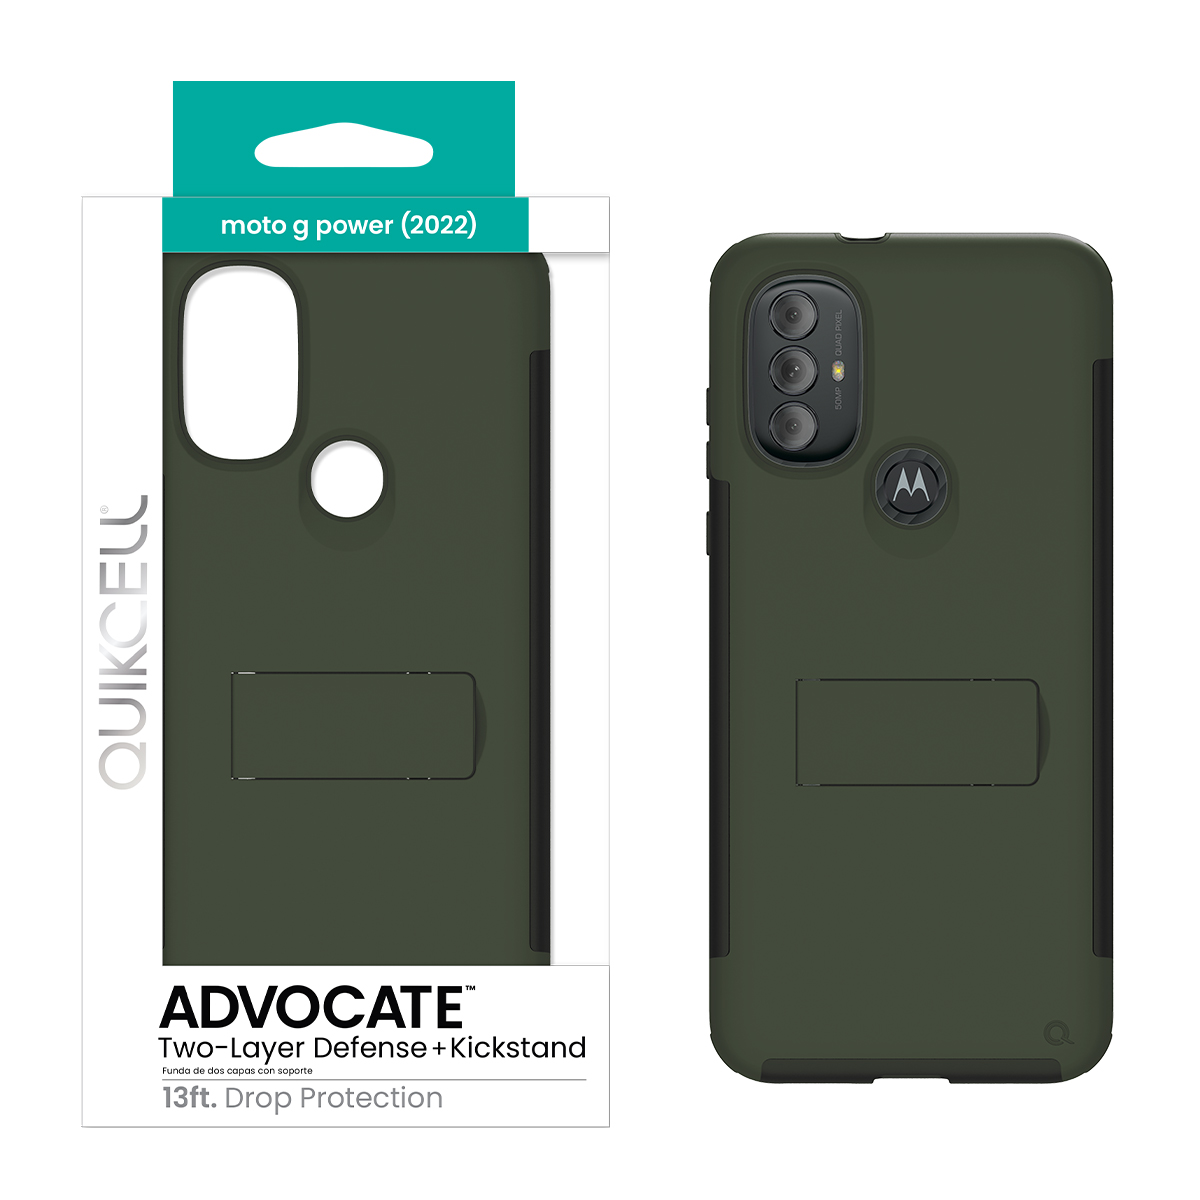 Geheim Bel terug Monumentaal Moto G Power (2022) QUIKCELL ADVOCATE Dual-Layer Kickstand Case – OLIVE  GREEN (1103681) | Mobilize Phone